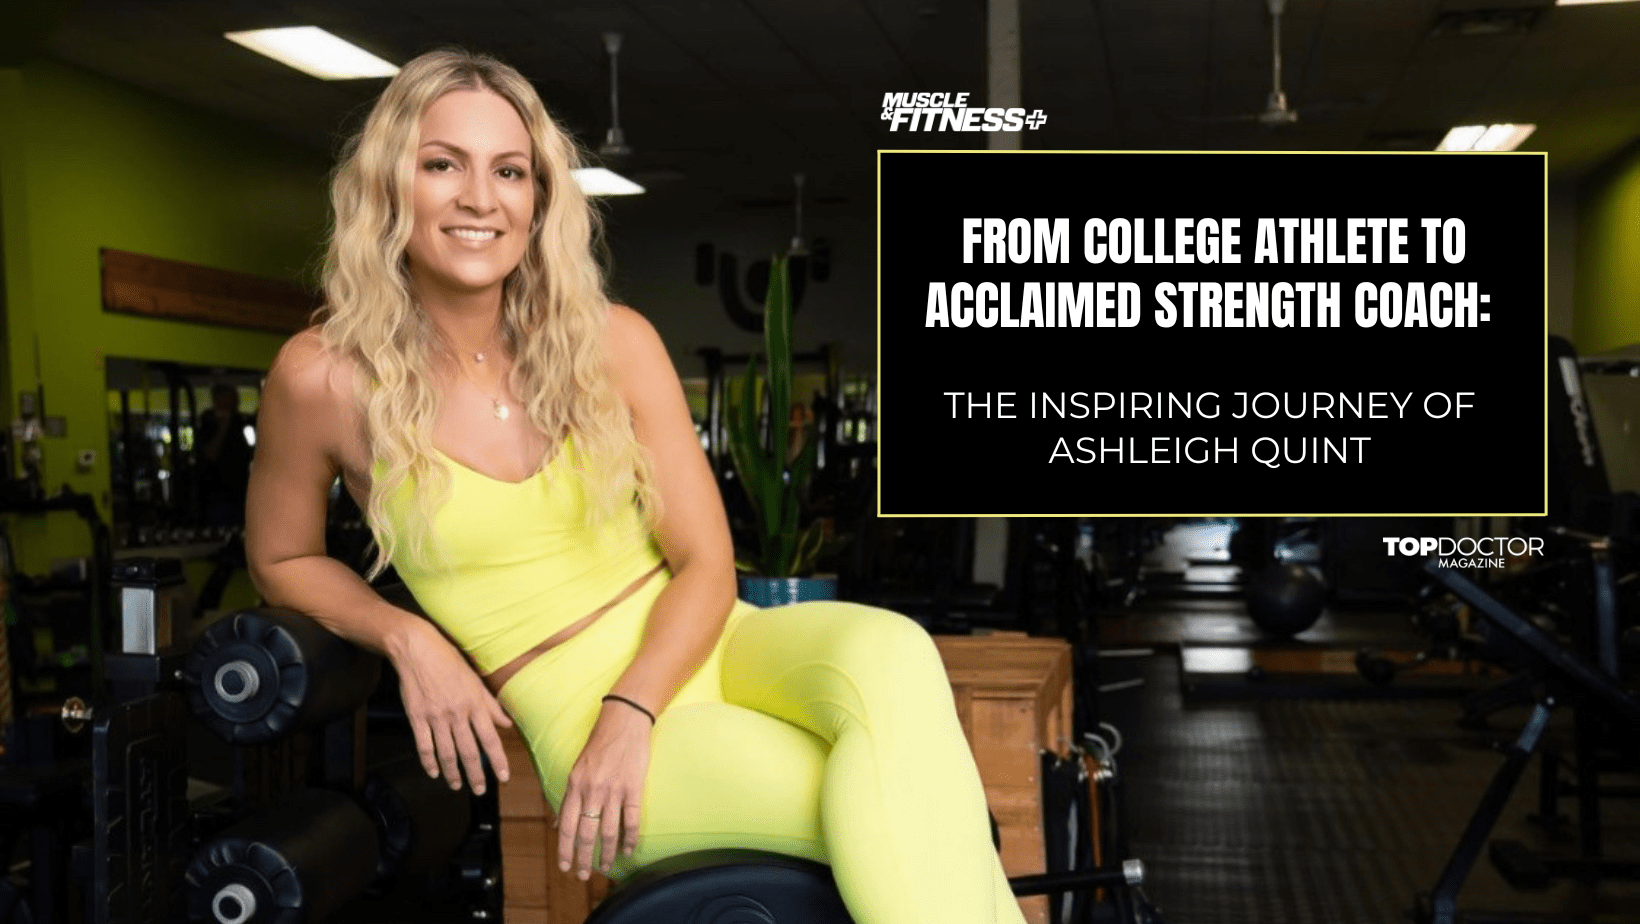 From College Athlete to Acclaimed Strength Coach: The Inspiring Journey of Ashleigh Quint